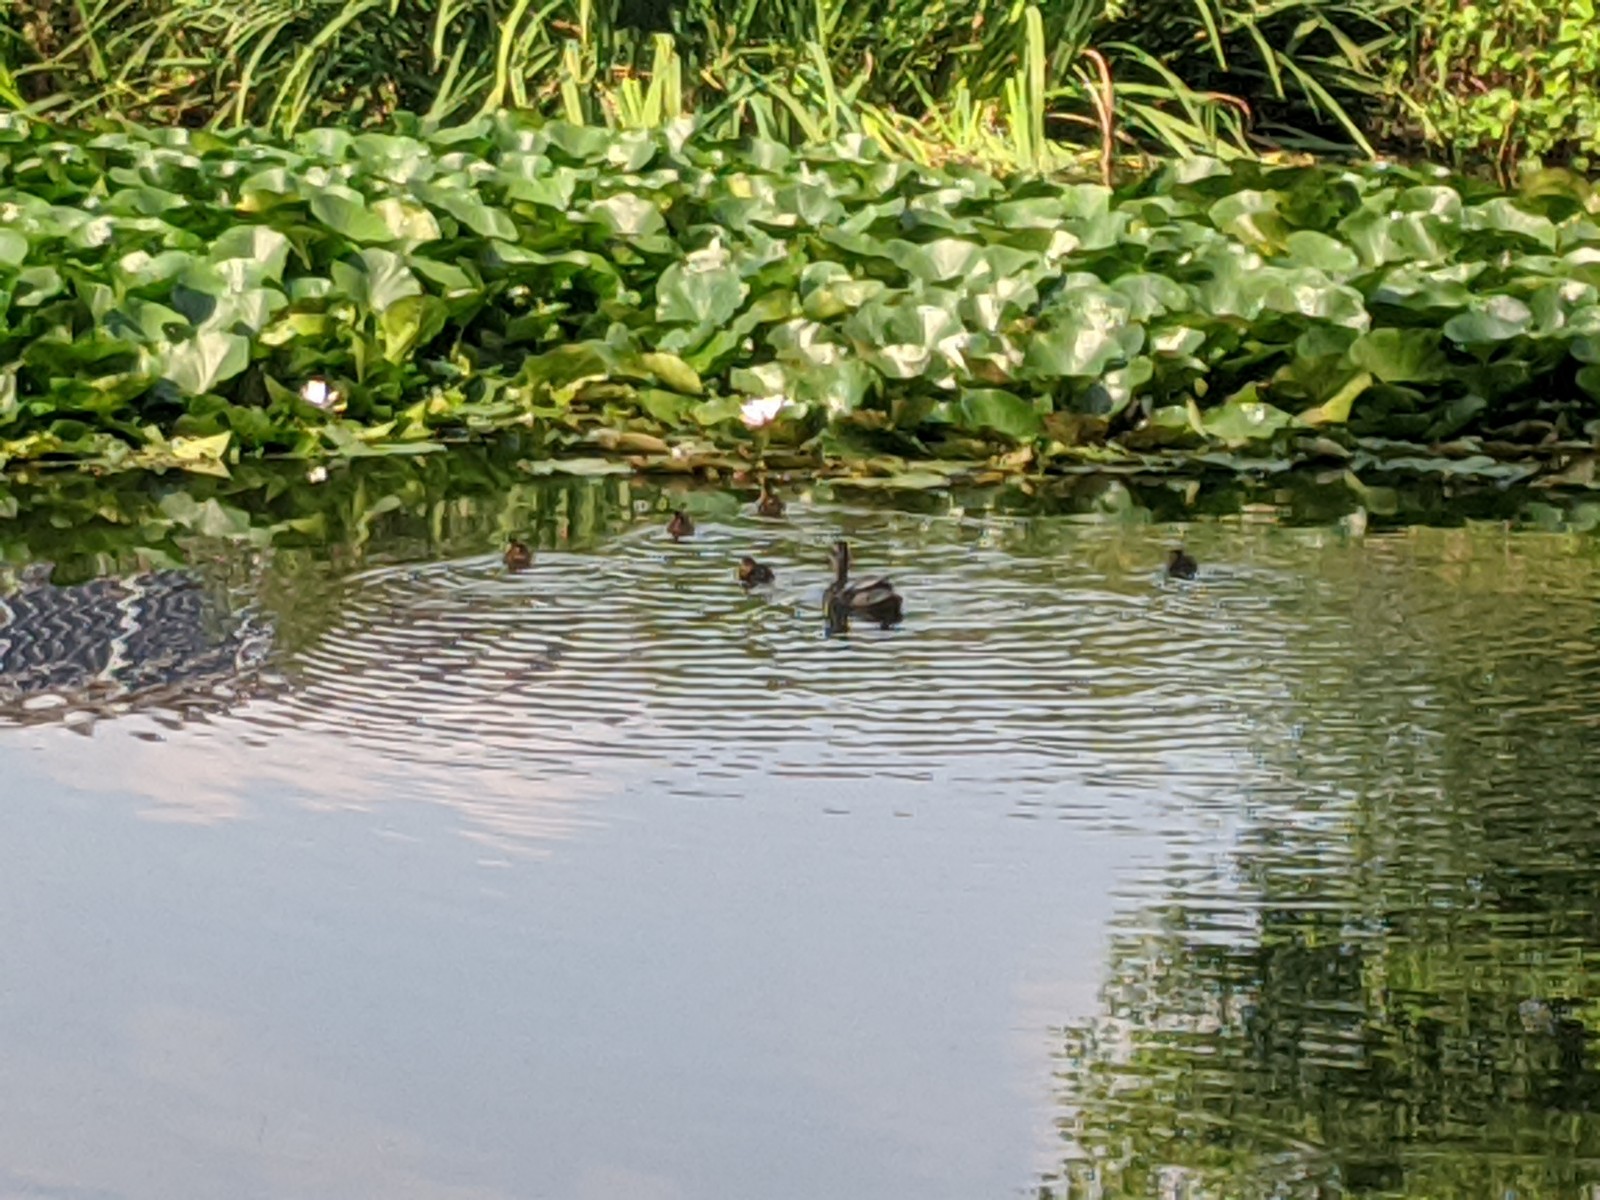 Nine new ducklings, some hidden in the lillies, August 12th